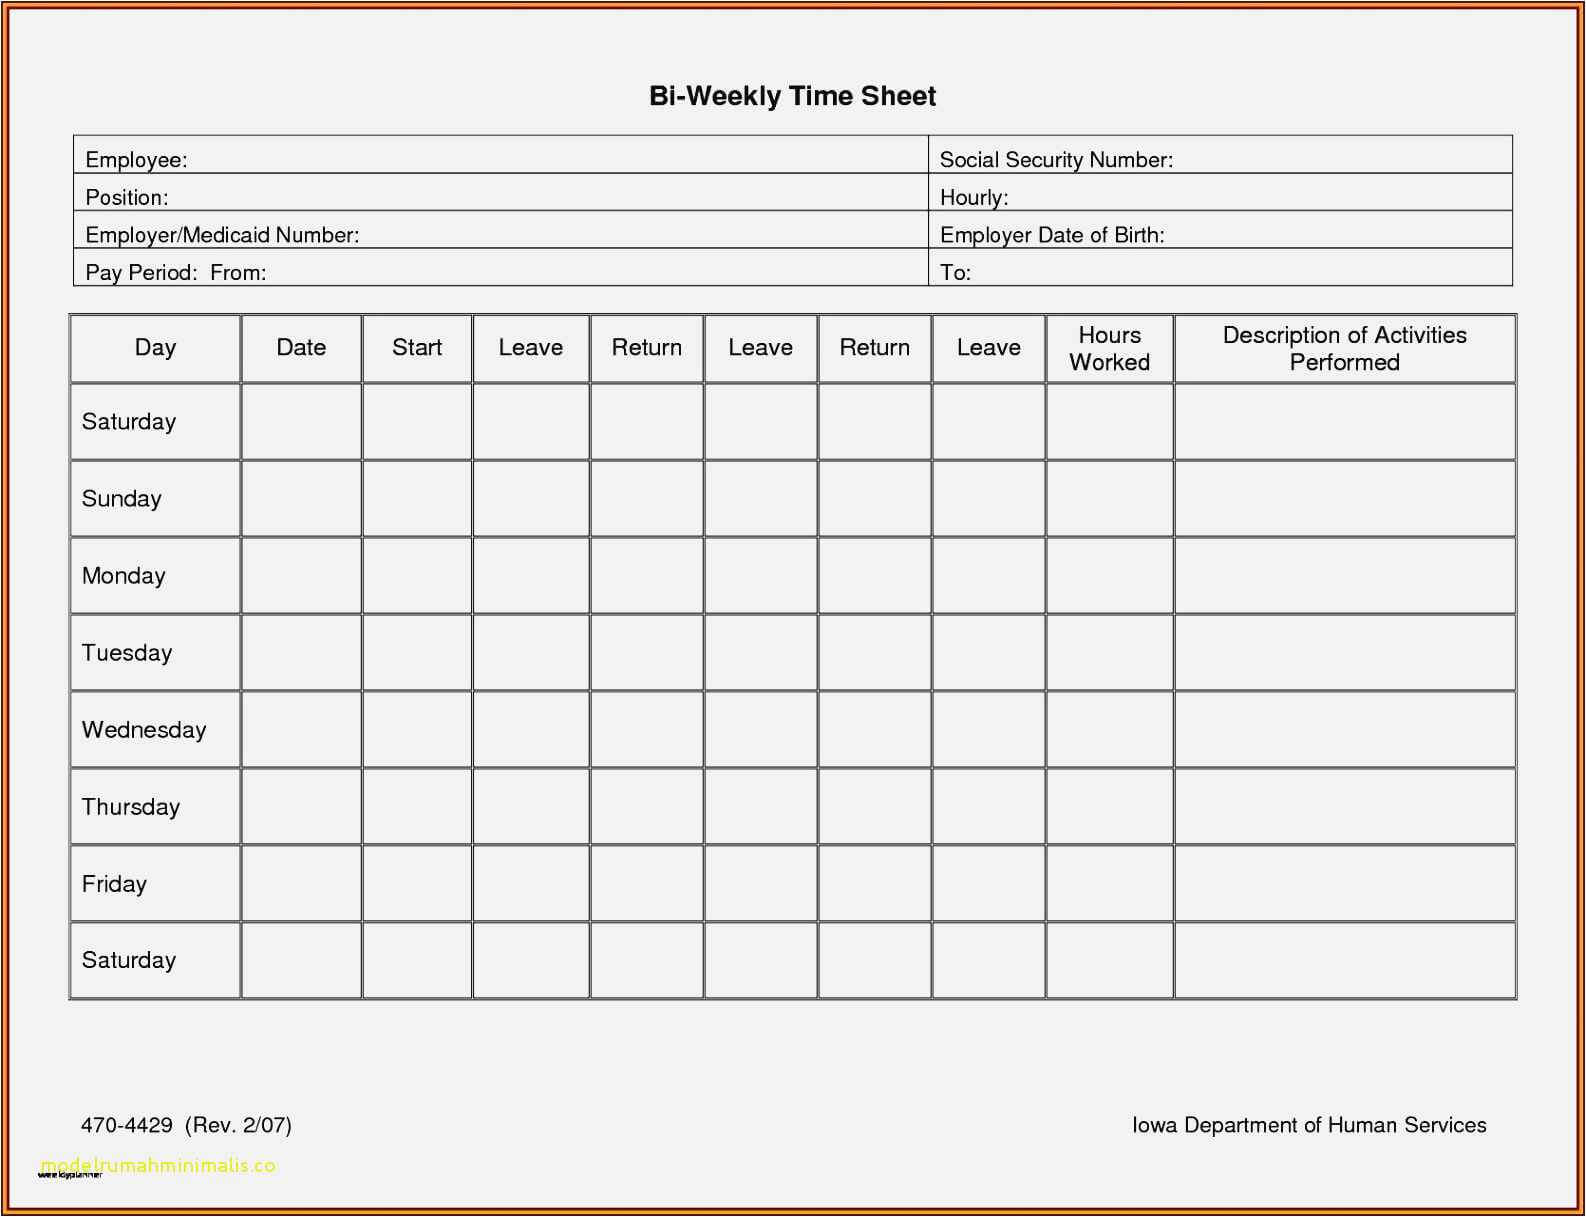 Daily Time Sheet Examples | Time Sheet Templates Throughout Weekly Time Card Template Free